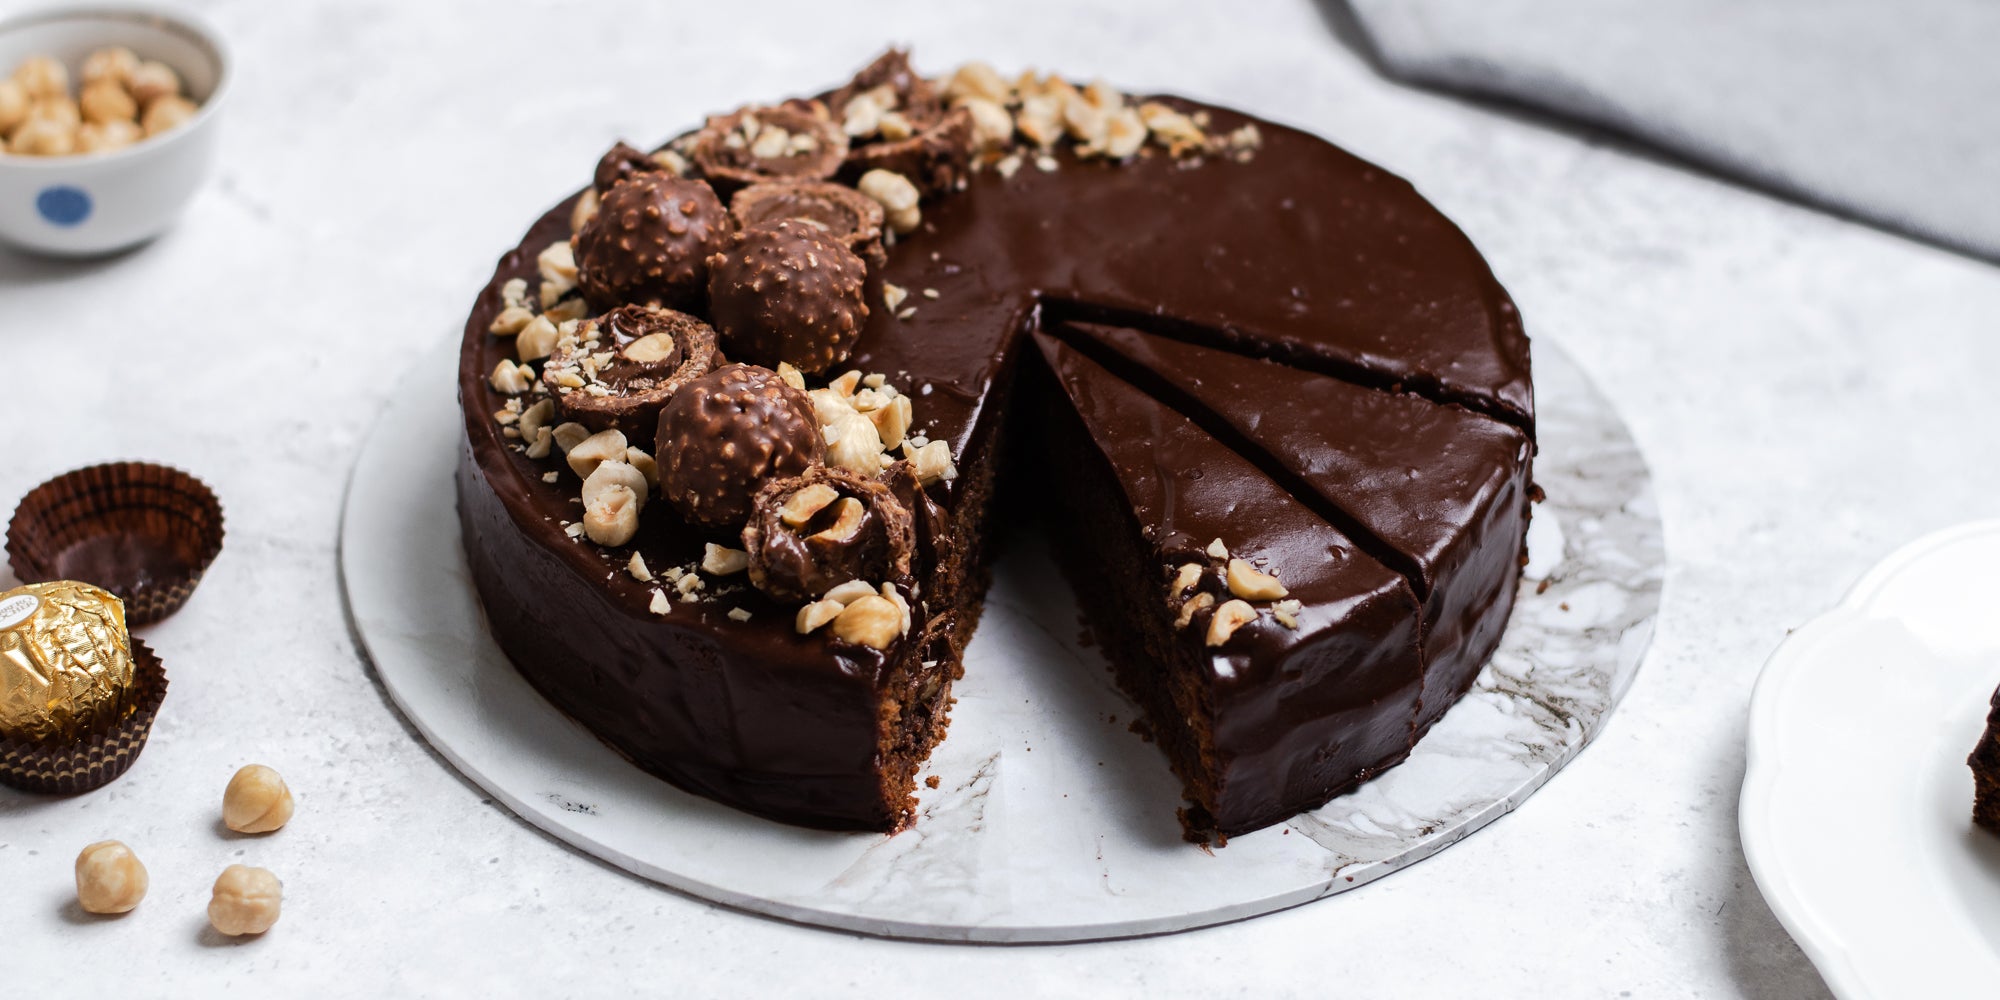 Gluten Free Chocolate Truffle Sachertorte sliced into pieces ready to serve. Sprinkled with hazelnuts served on a marble plate. Bowl of hazelnuts in the background